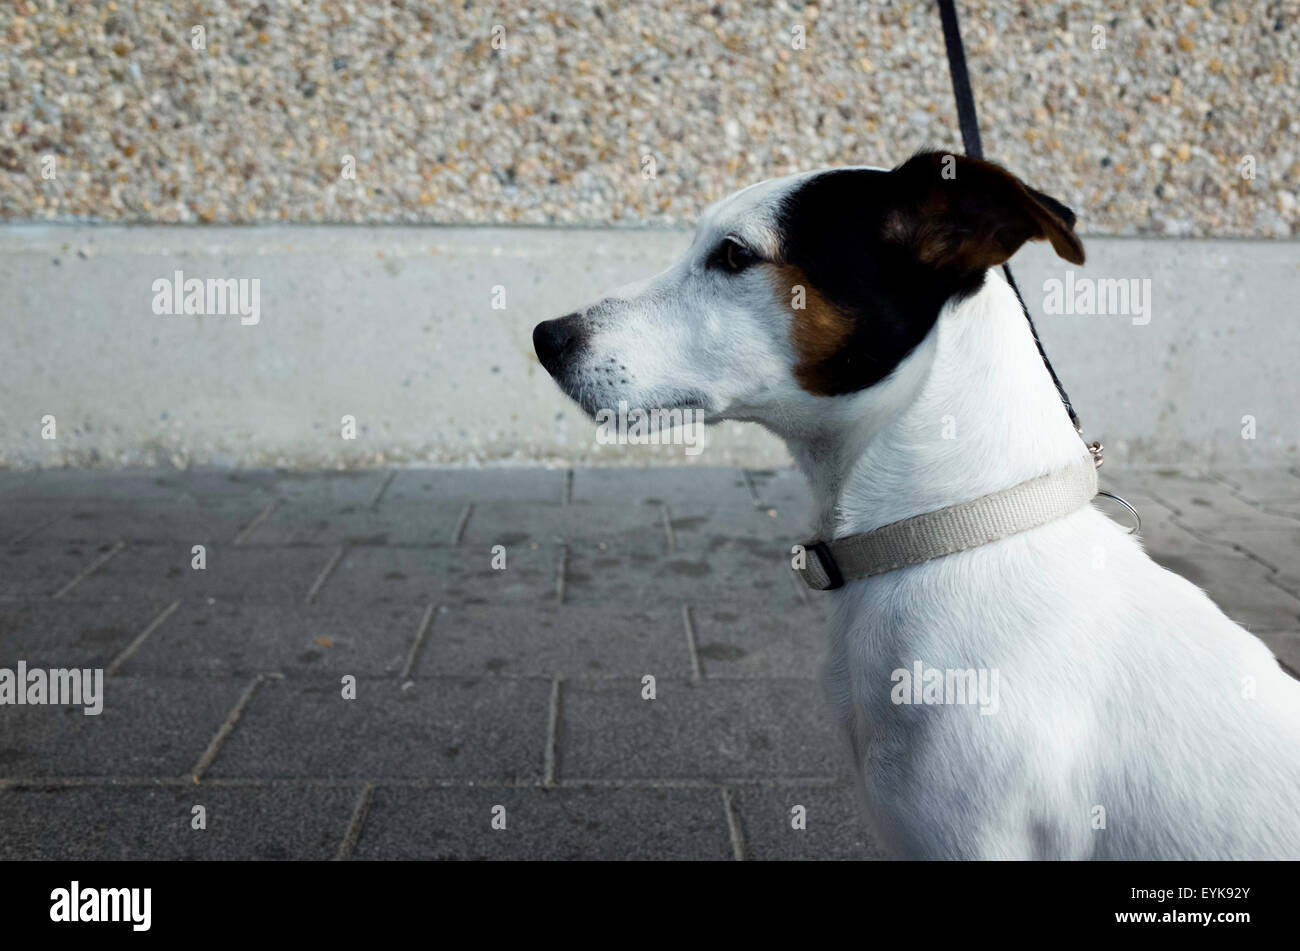 Jack Russel Terrier dog on lash waiting for owner Stock Photo